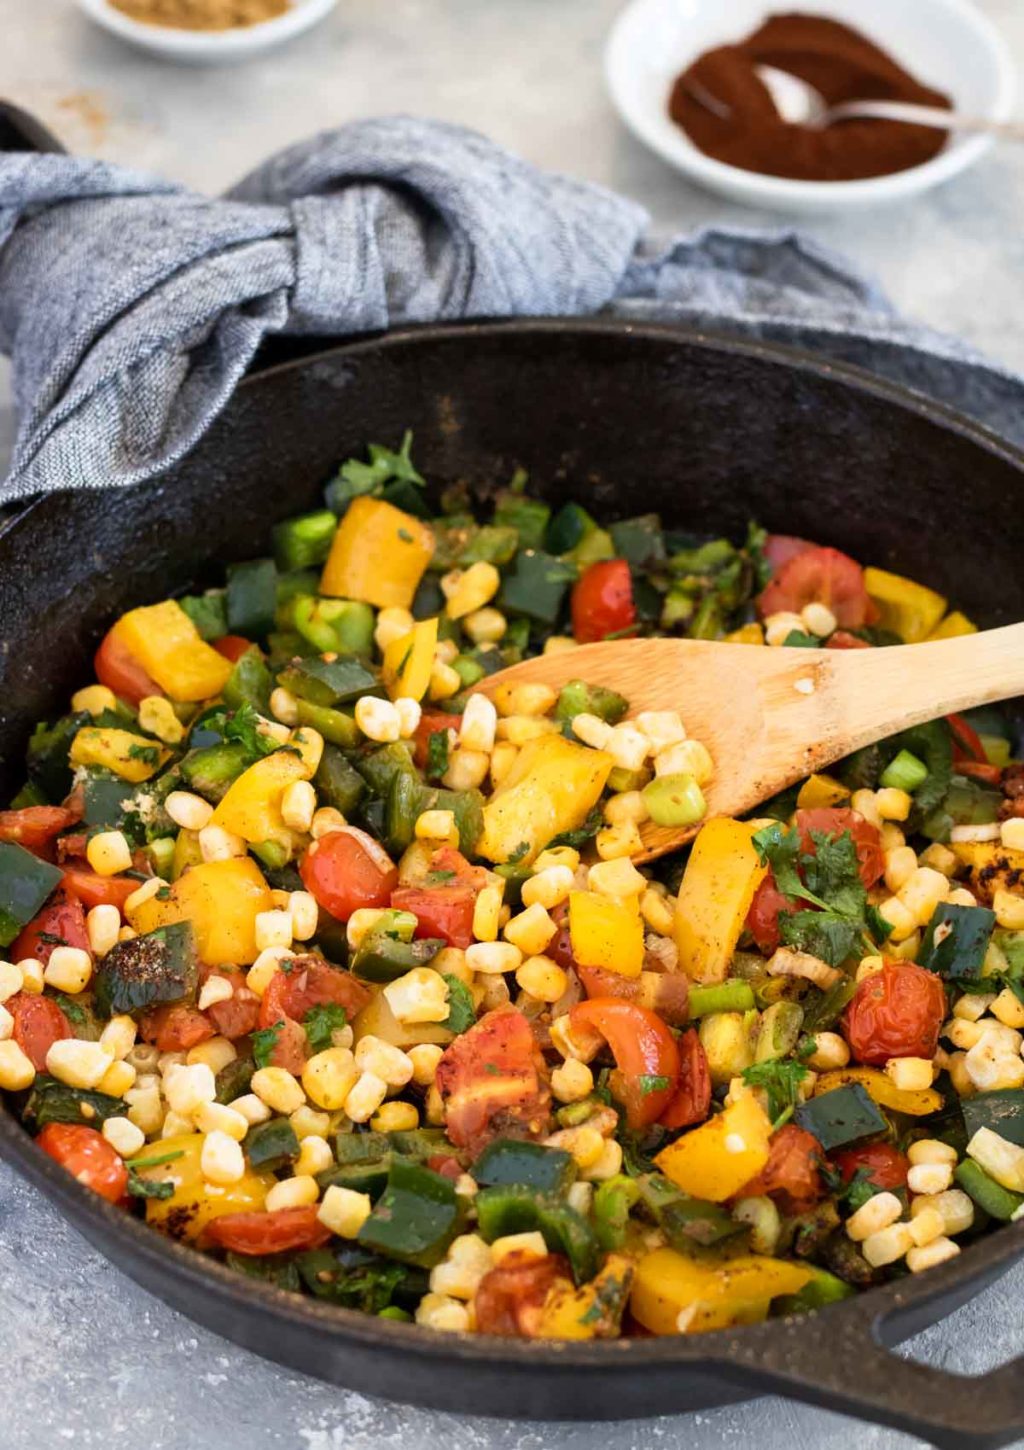 poblano peppers, tomatoes, corn, green onions, cilantro, bell peppers in a cast iron skillet